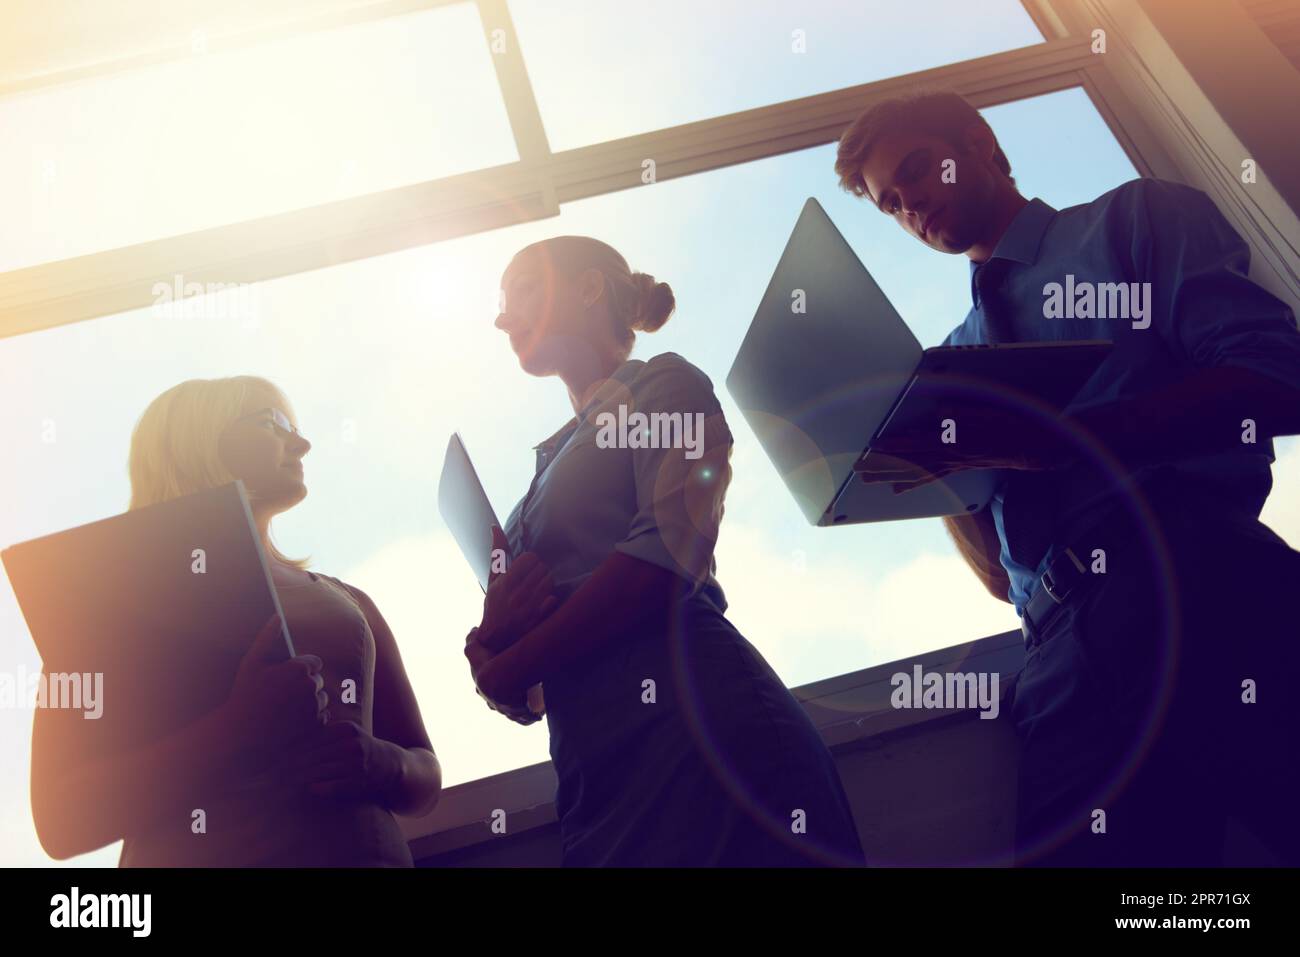 On their way to the top. Silhouette of three young businesspeople standing in front of a window. Stock Photo